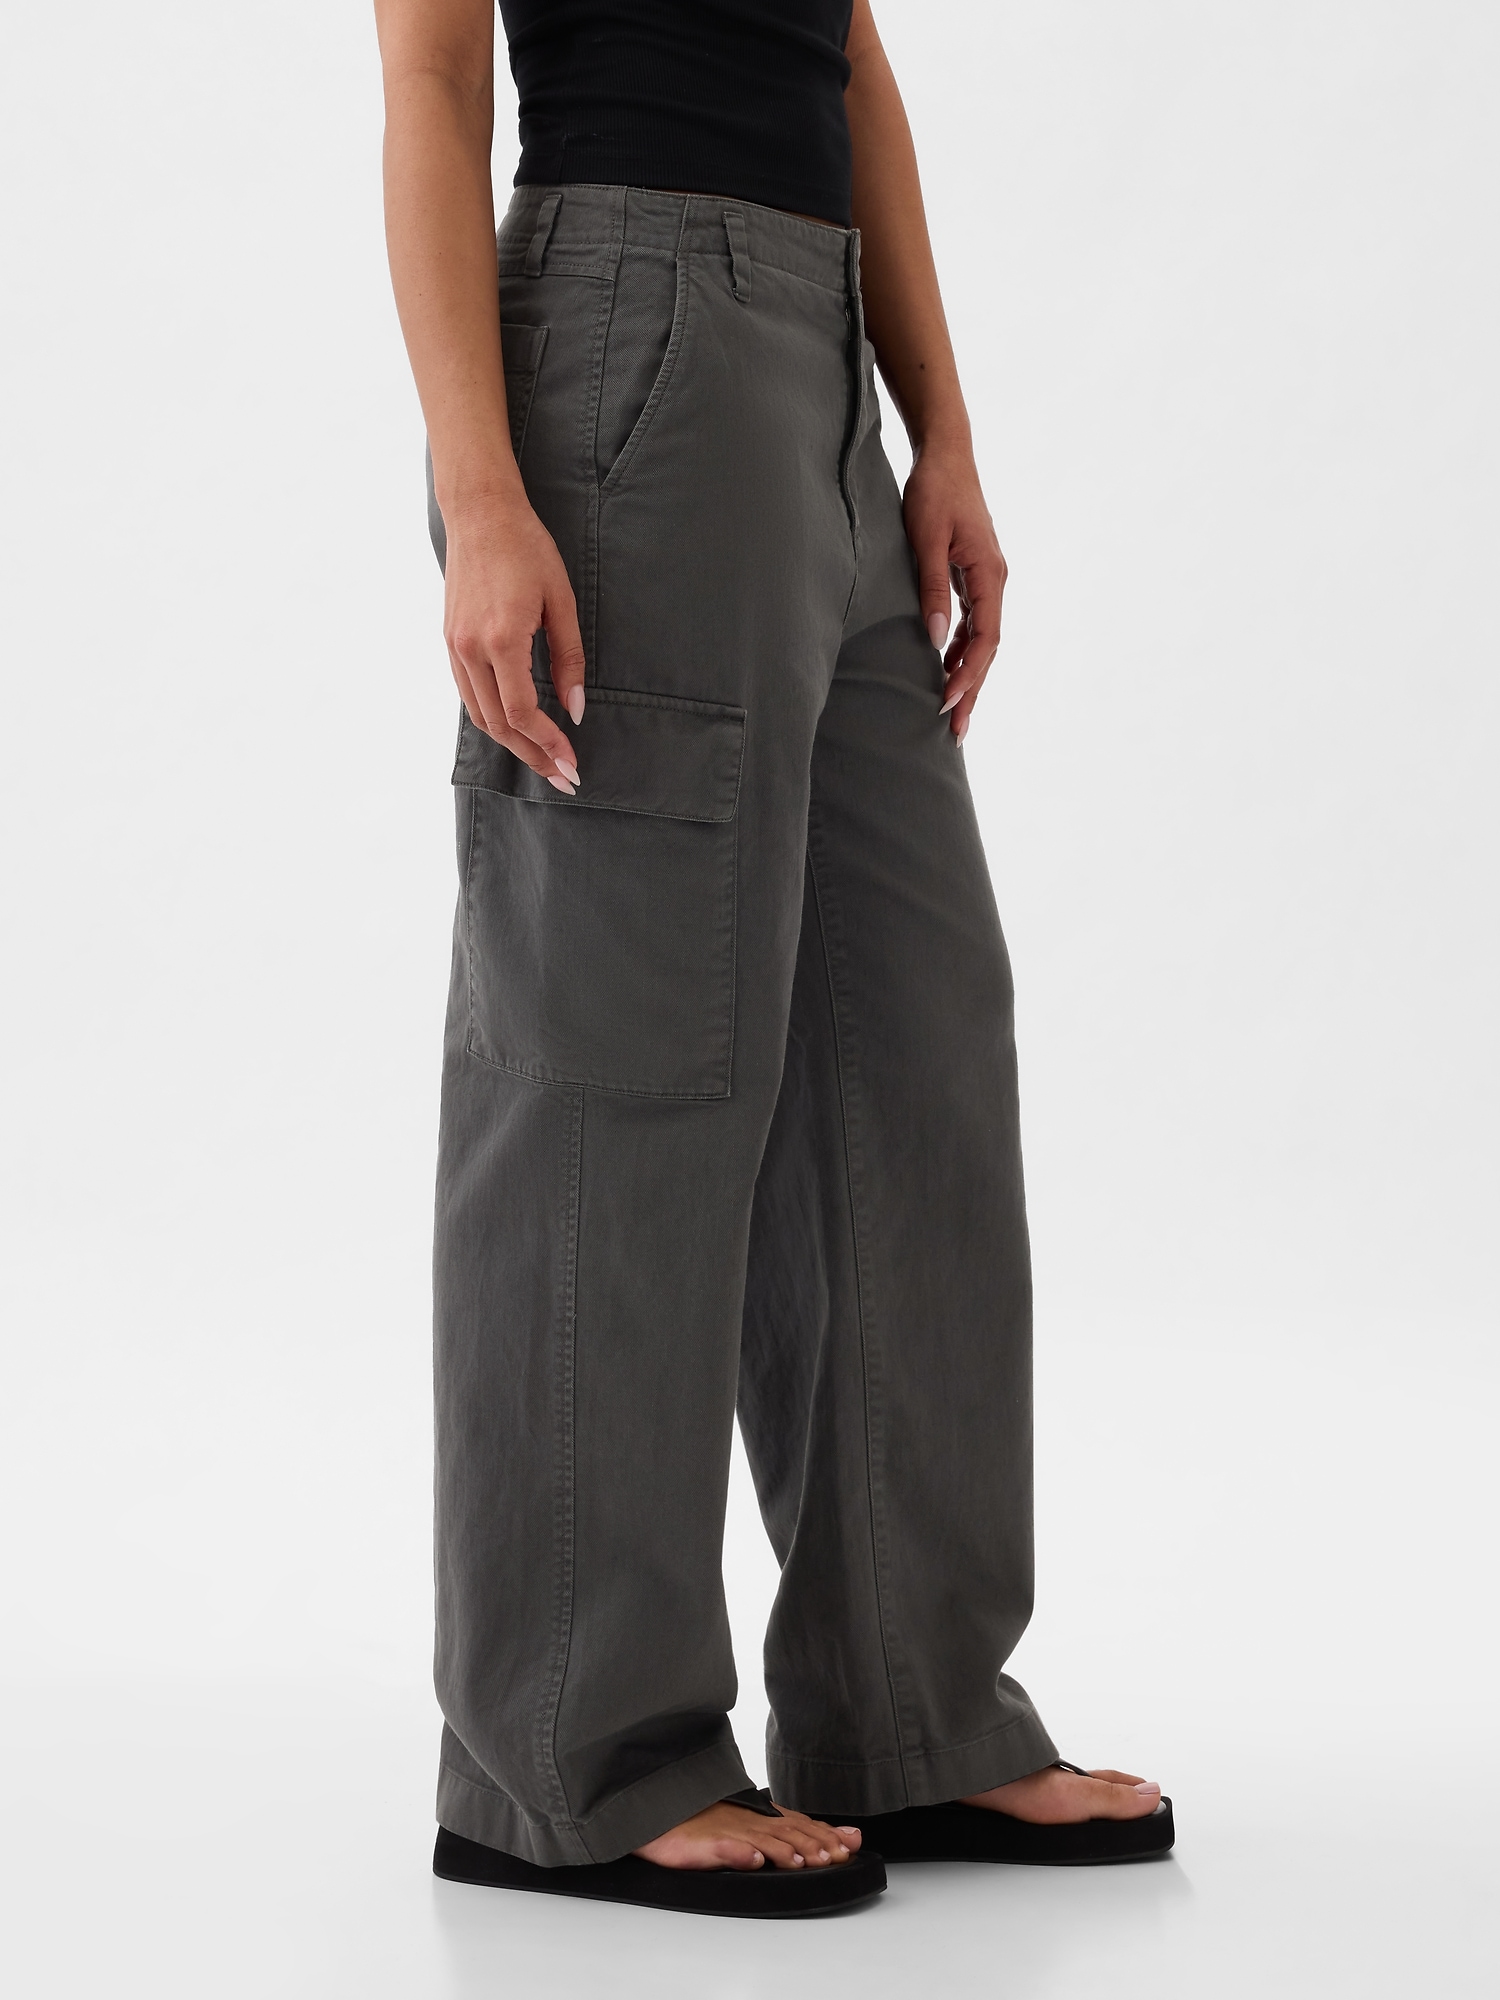 3 pairs of cargo pants for smaller waists & bigger hips/bums